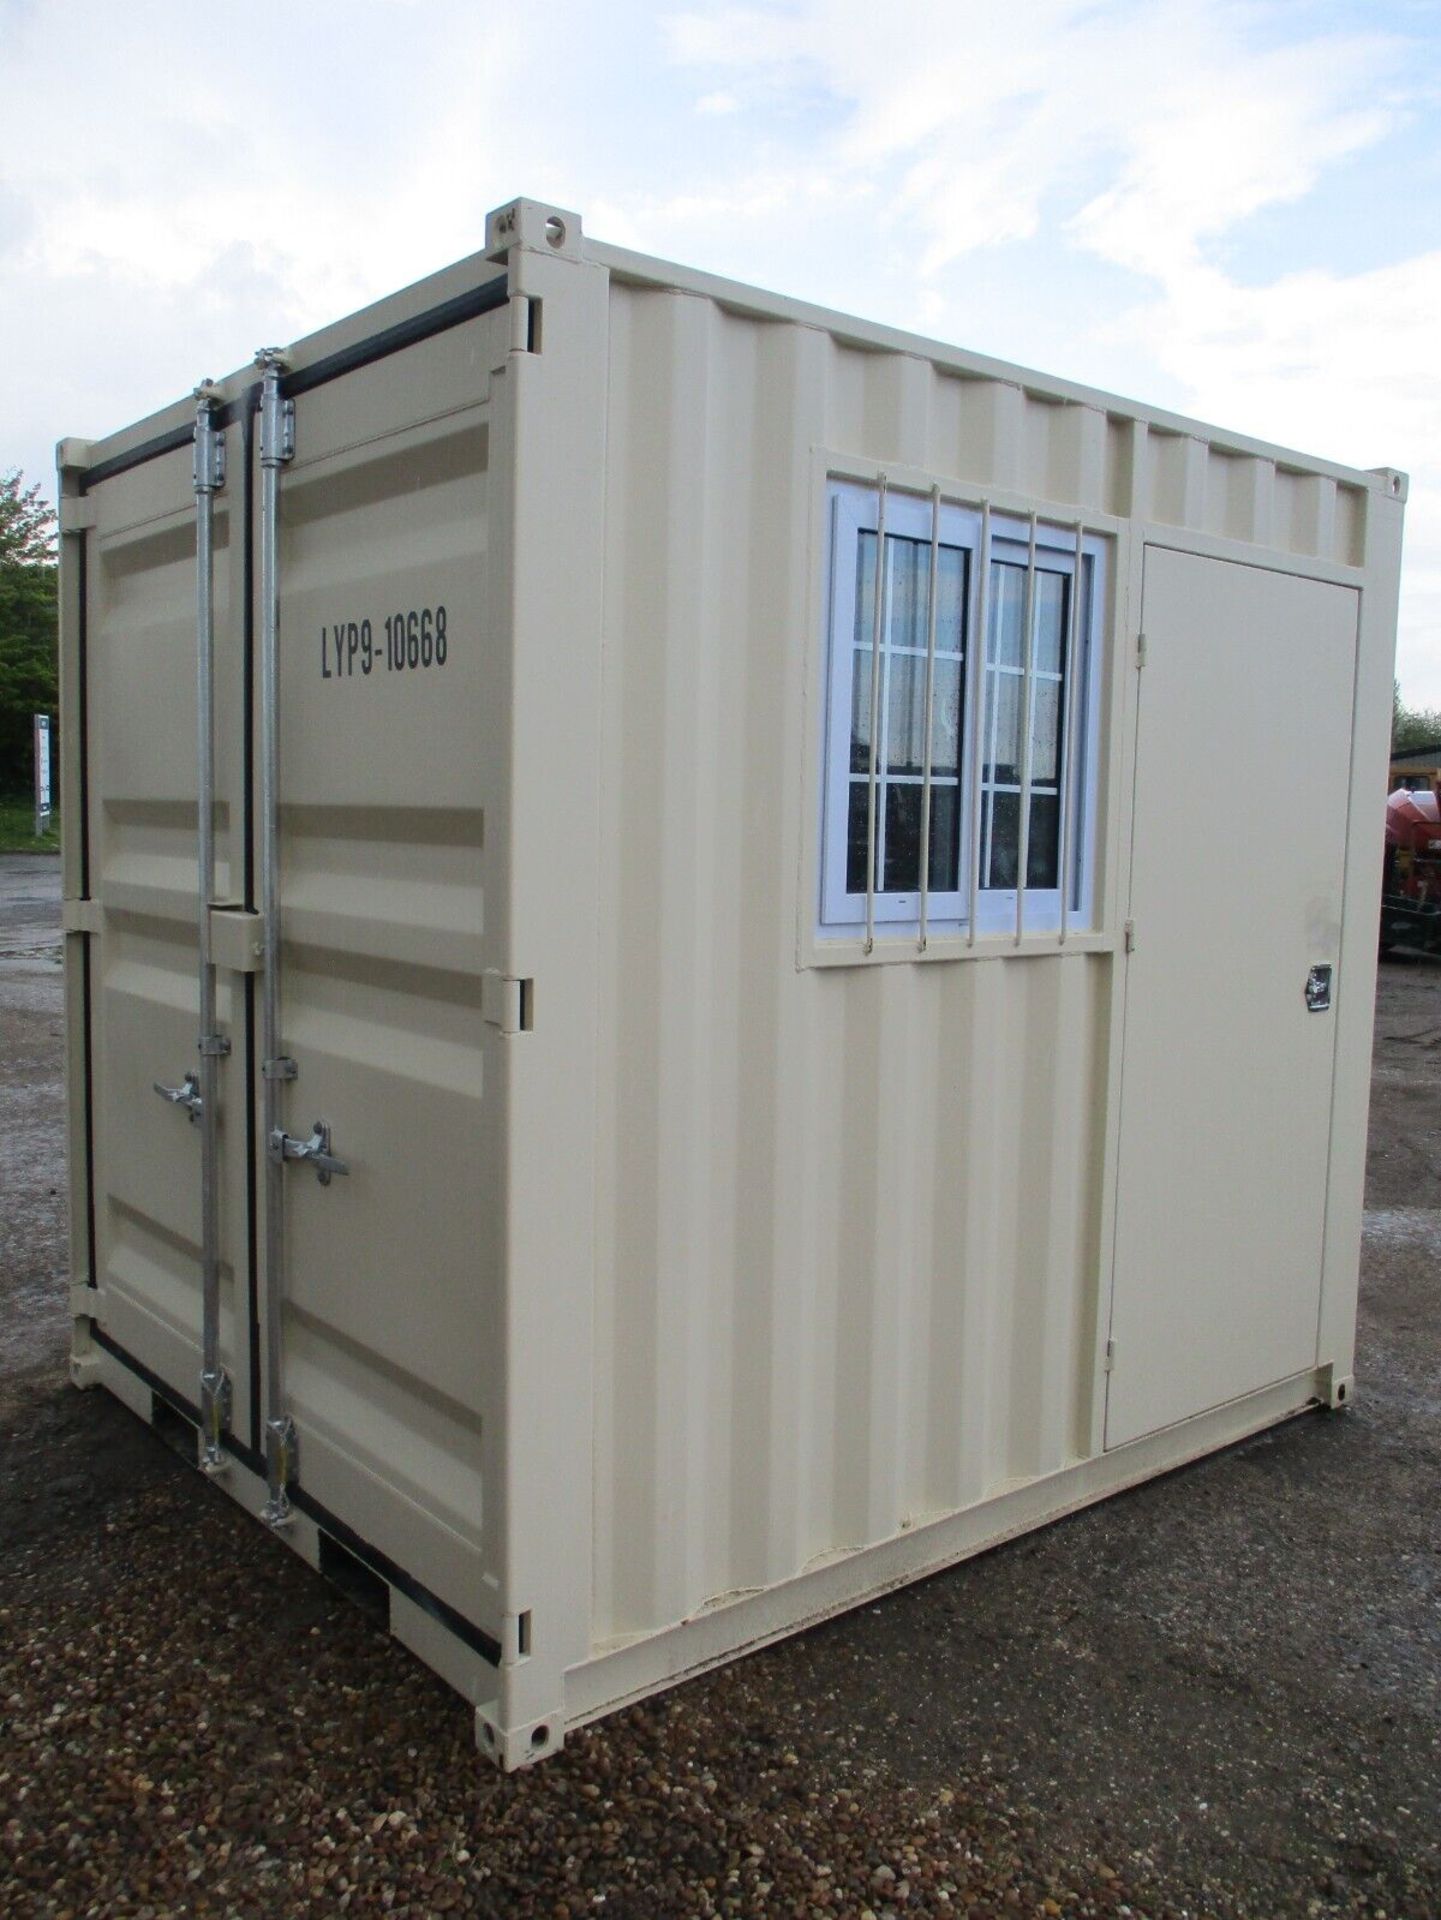 BRAND NEW 9-FOOT SHIPPING CONTAINER